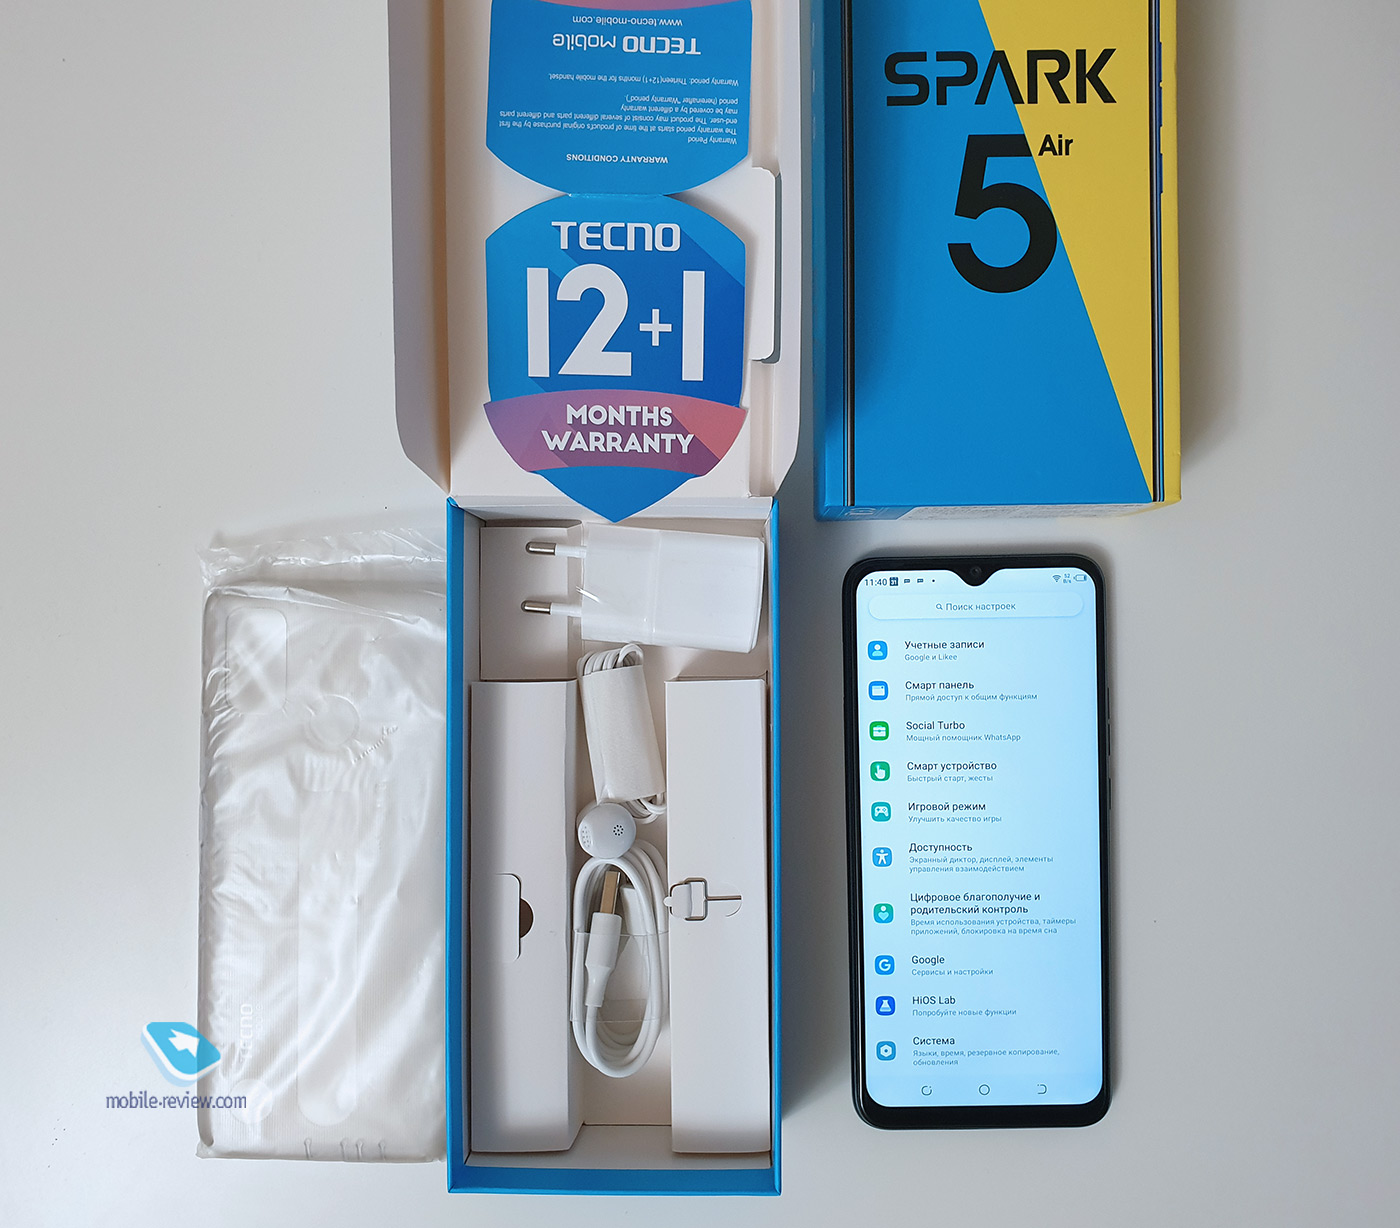 TECNO SPARK 5 Air: 5 reasons for and 1 against